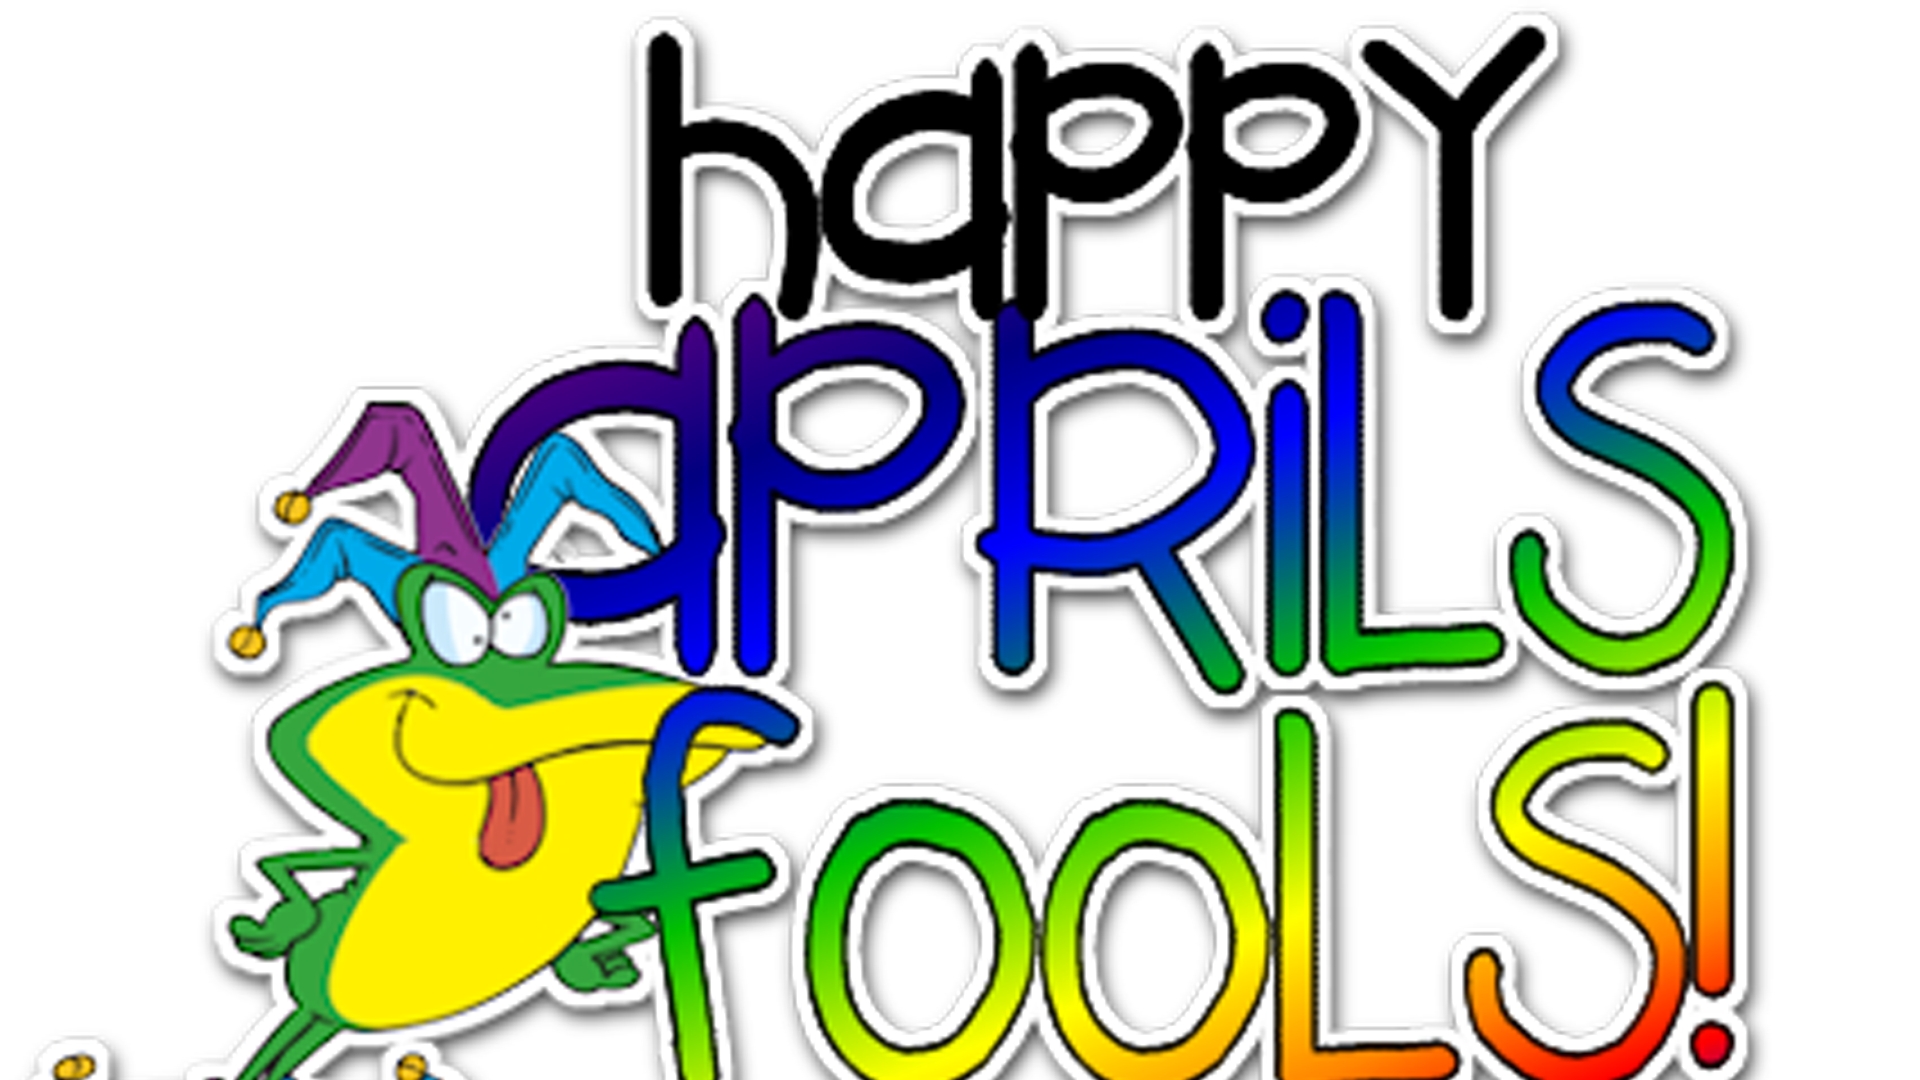 April showers bring may flowers clip art free 4 - Cliparting.com